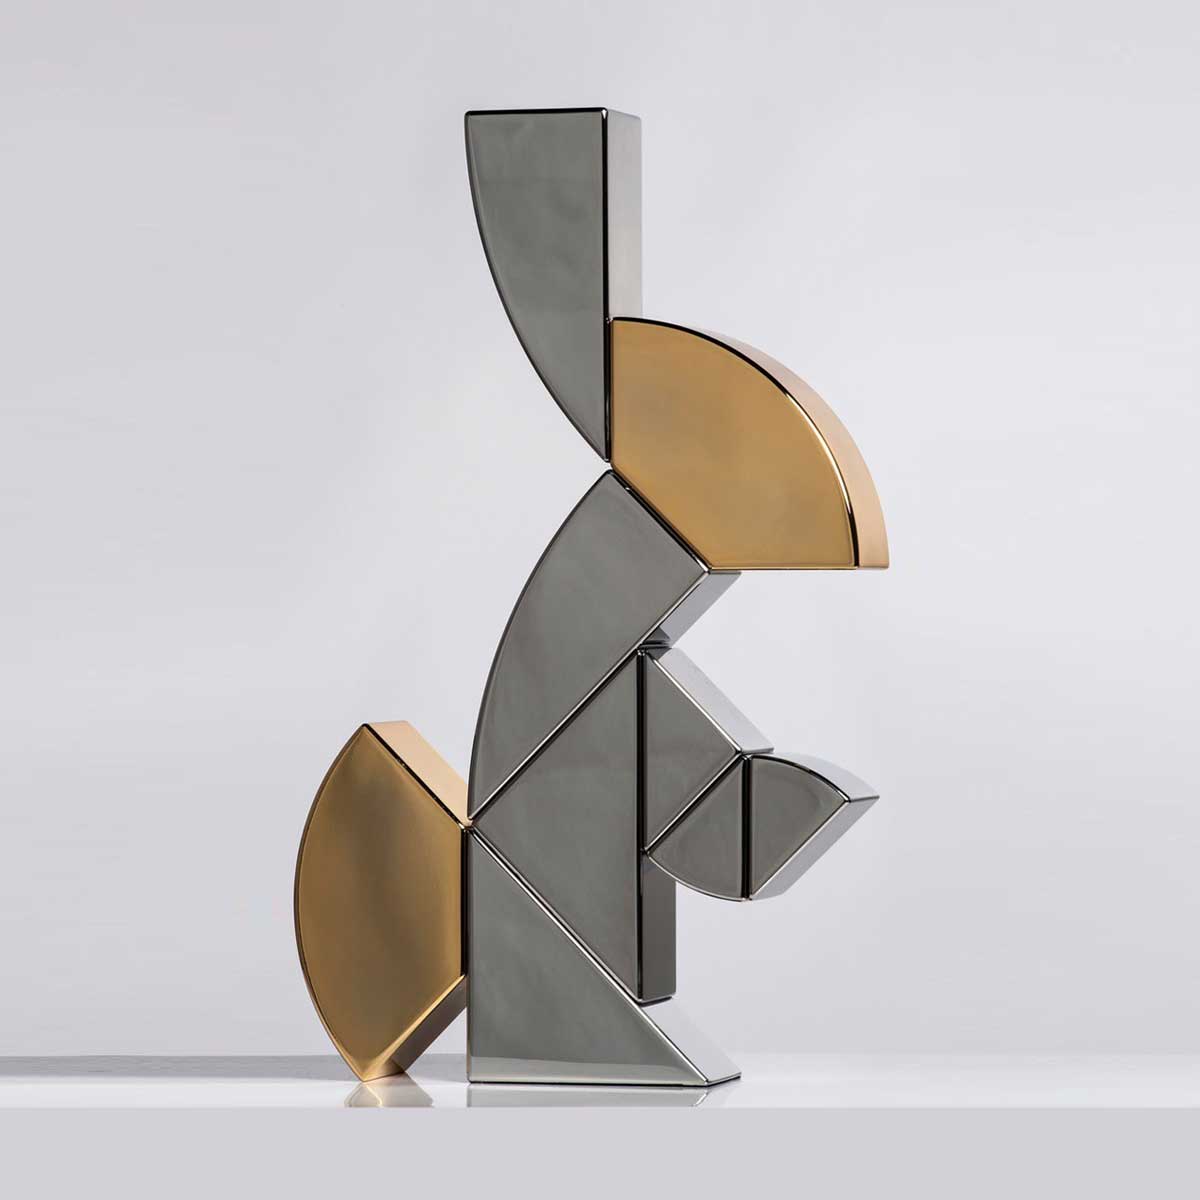 polished stainless steel sculpture